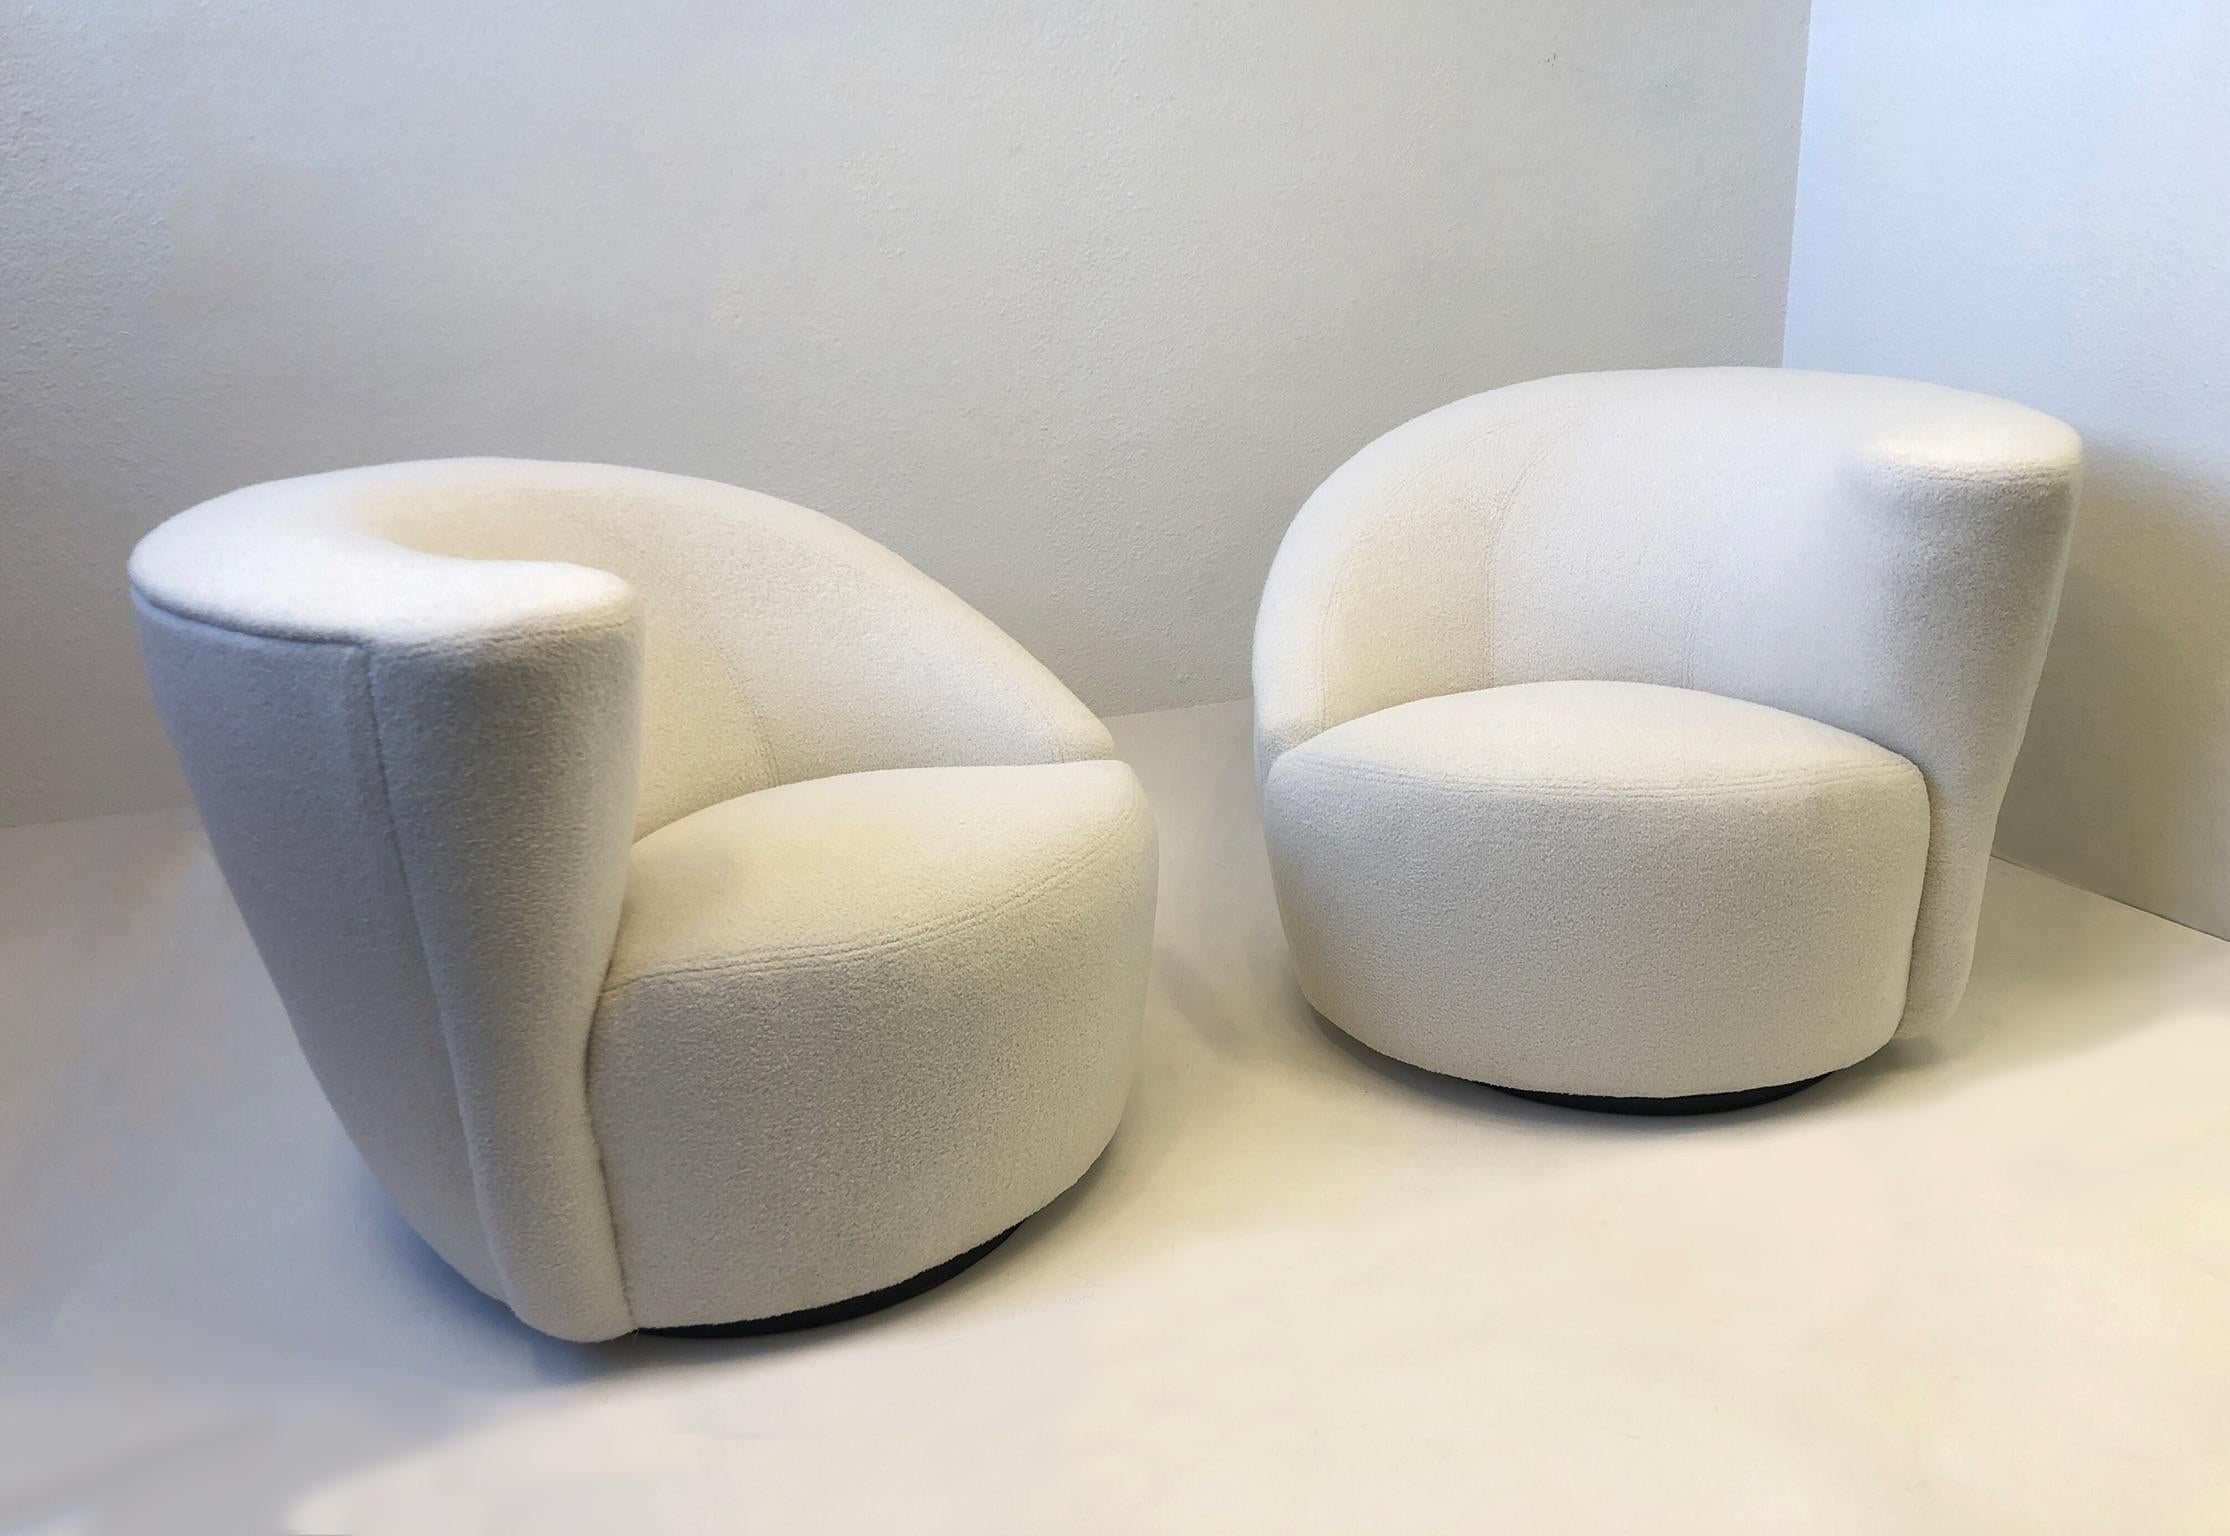 1990’s Pair of ‘Corkscrew’ lounge chairs and ottomans designed by Vladimir Kagan for Directional.
Newly recovered in a soft white boucle fabric. The chairs rotate 180 and return to original position. 
Measurements: 36” Wide, 36” Deep, 29” High,